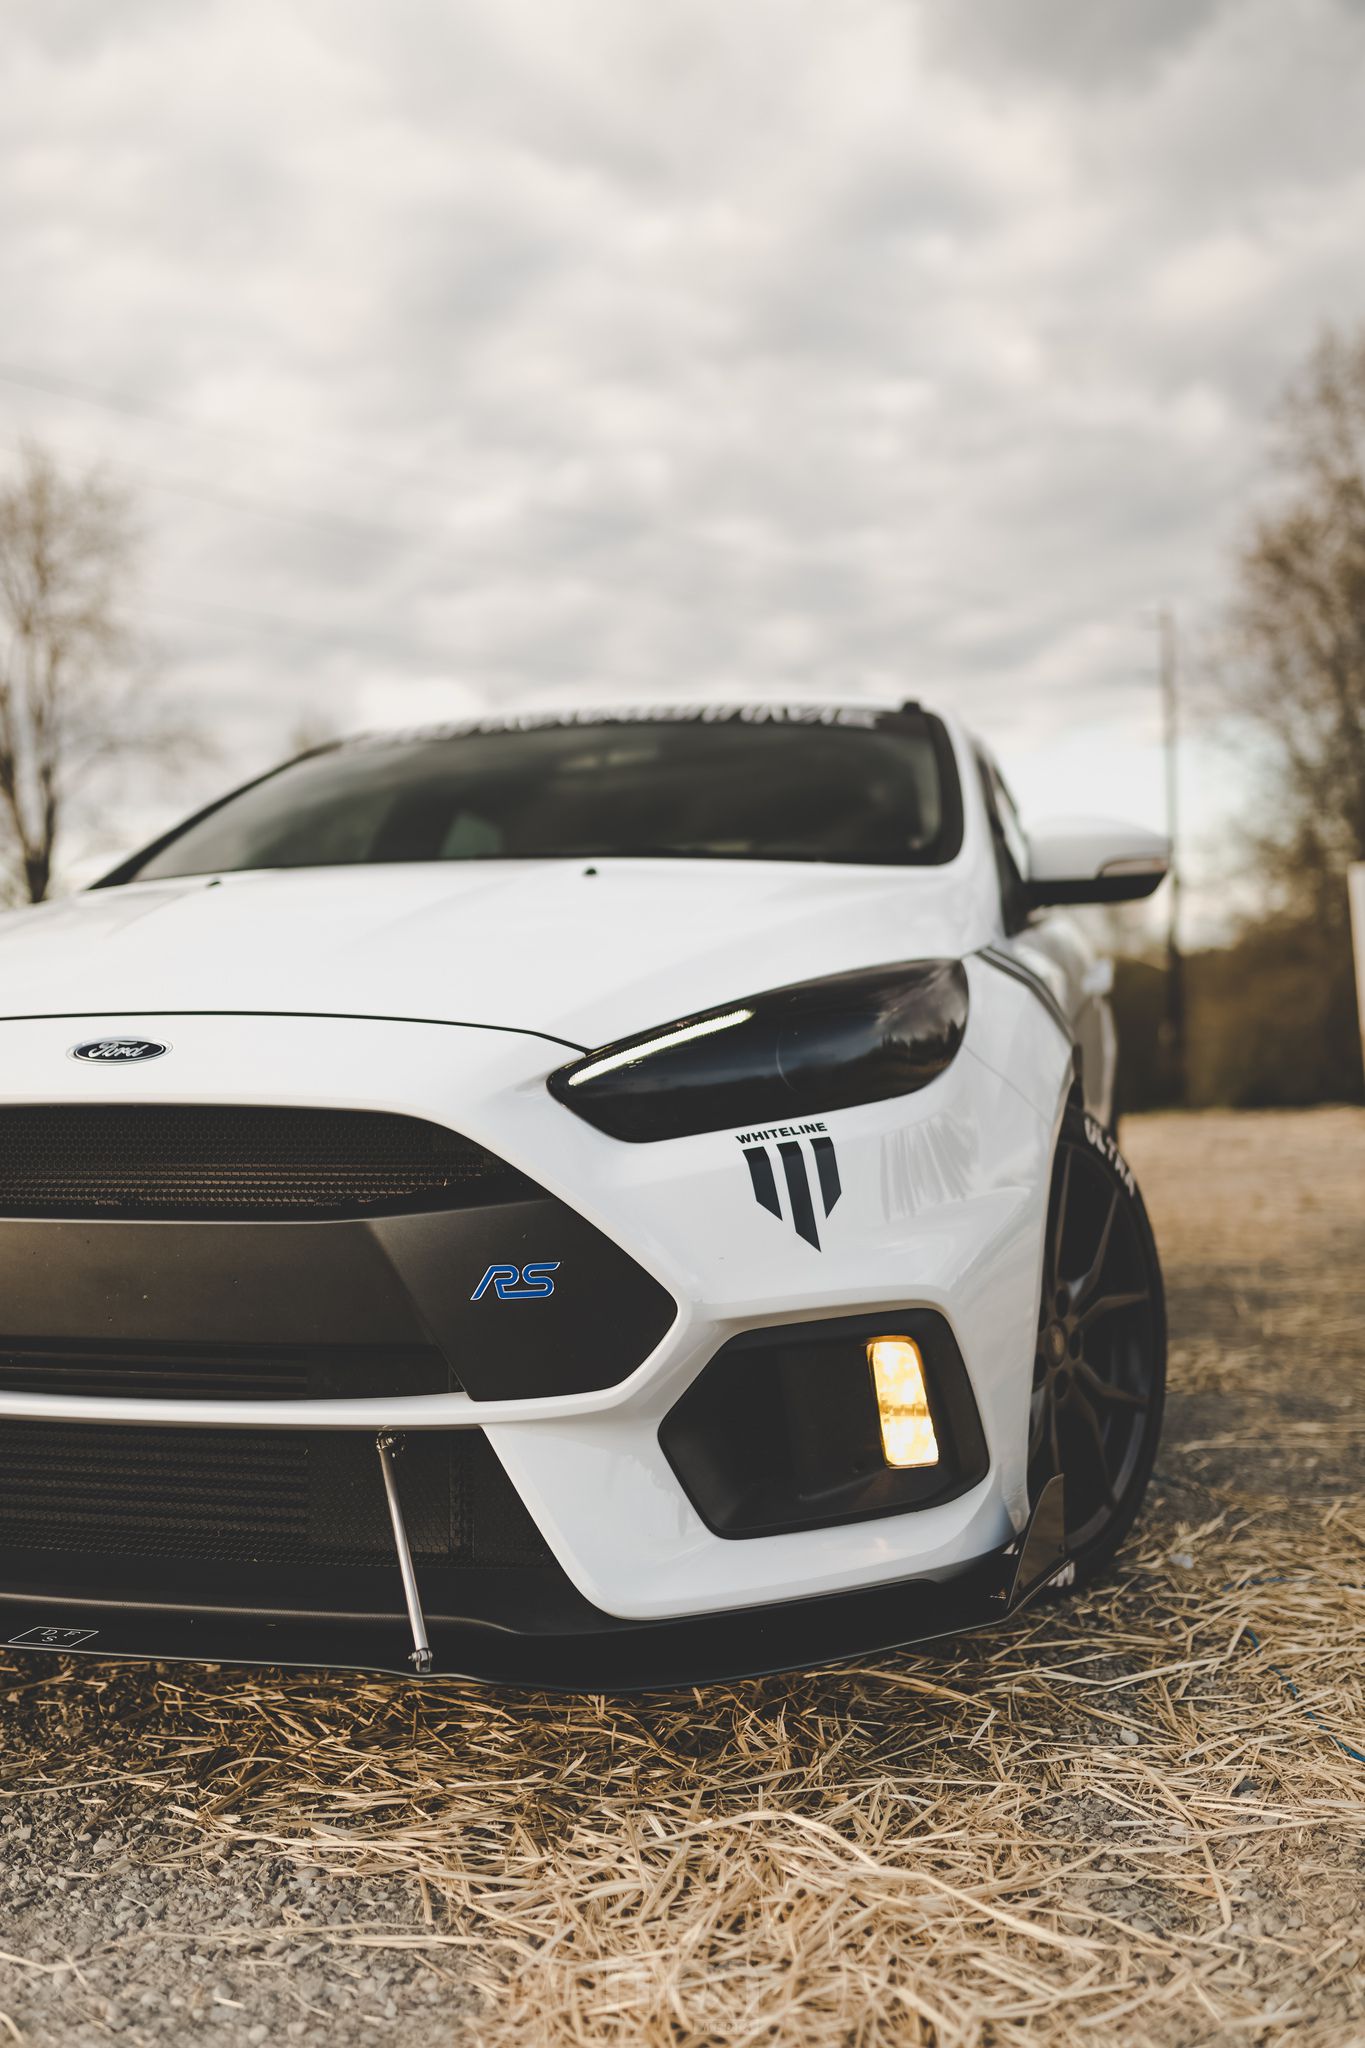 Ford Focus Rs - Ford Focus Rs Wallpaper Iphone - HD Wallpaper 